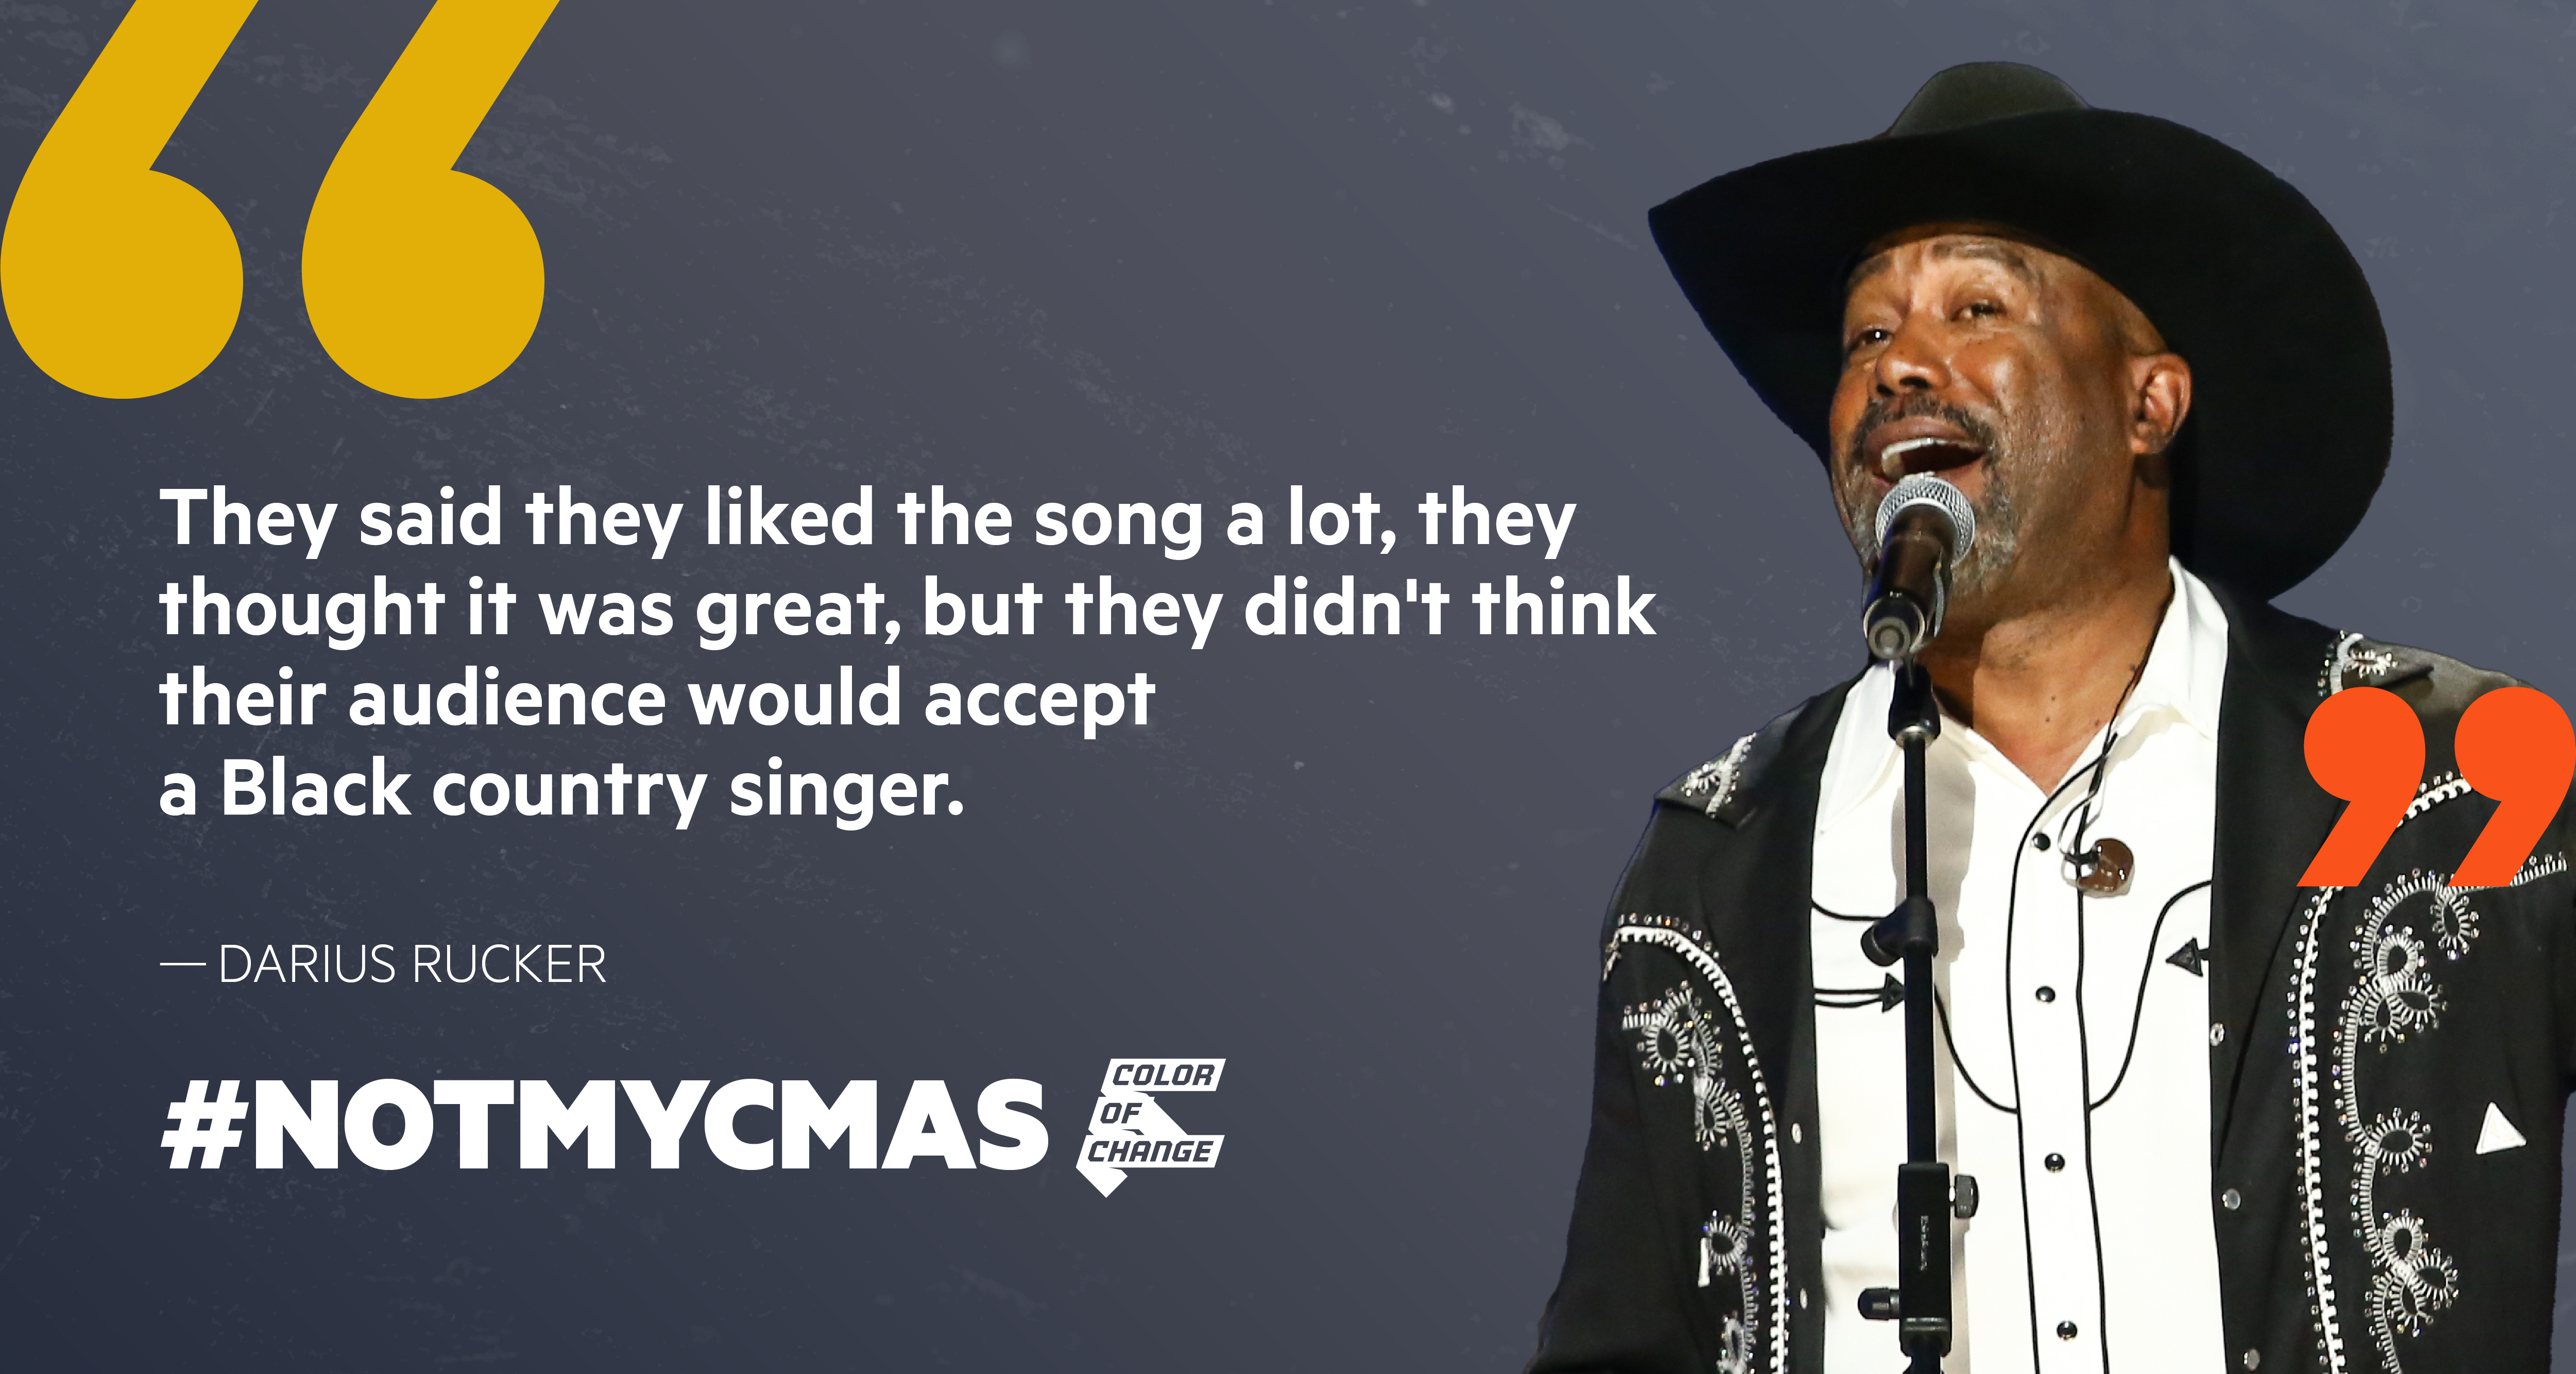 A photo of Black country singer, Darius Rucker, as a quote from a racist experience in country music is placed to his left: "They said they liked the song a lot...but they didn't think their audience would accept a Black country singer."